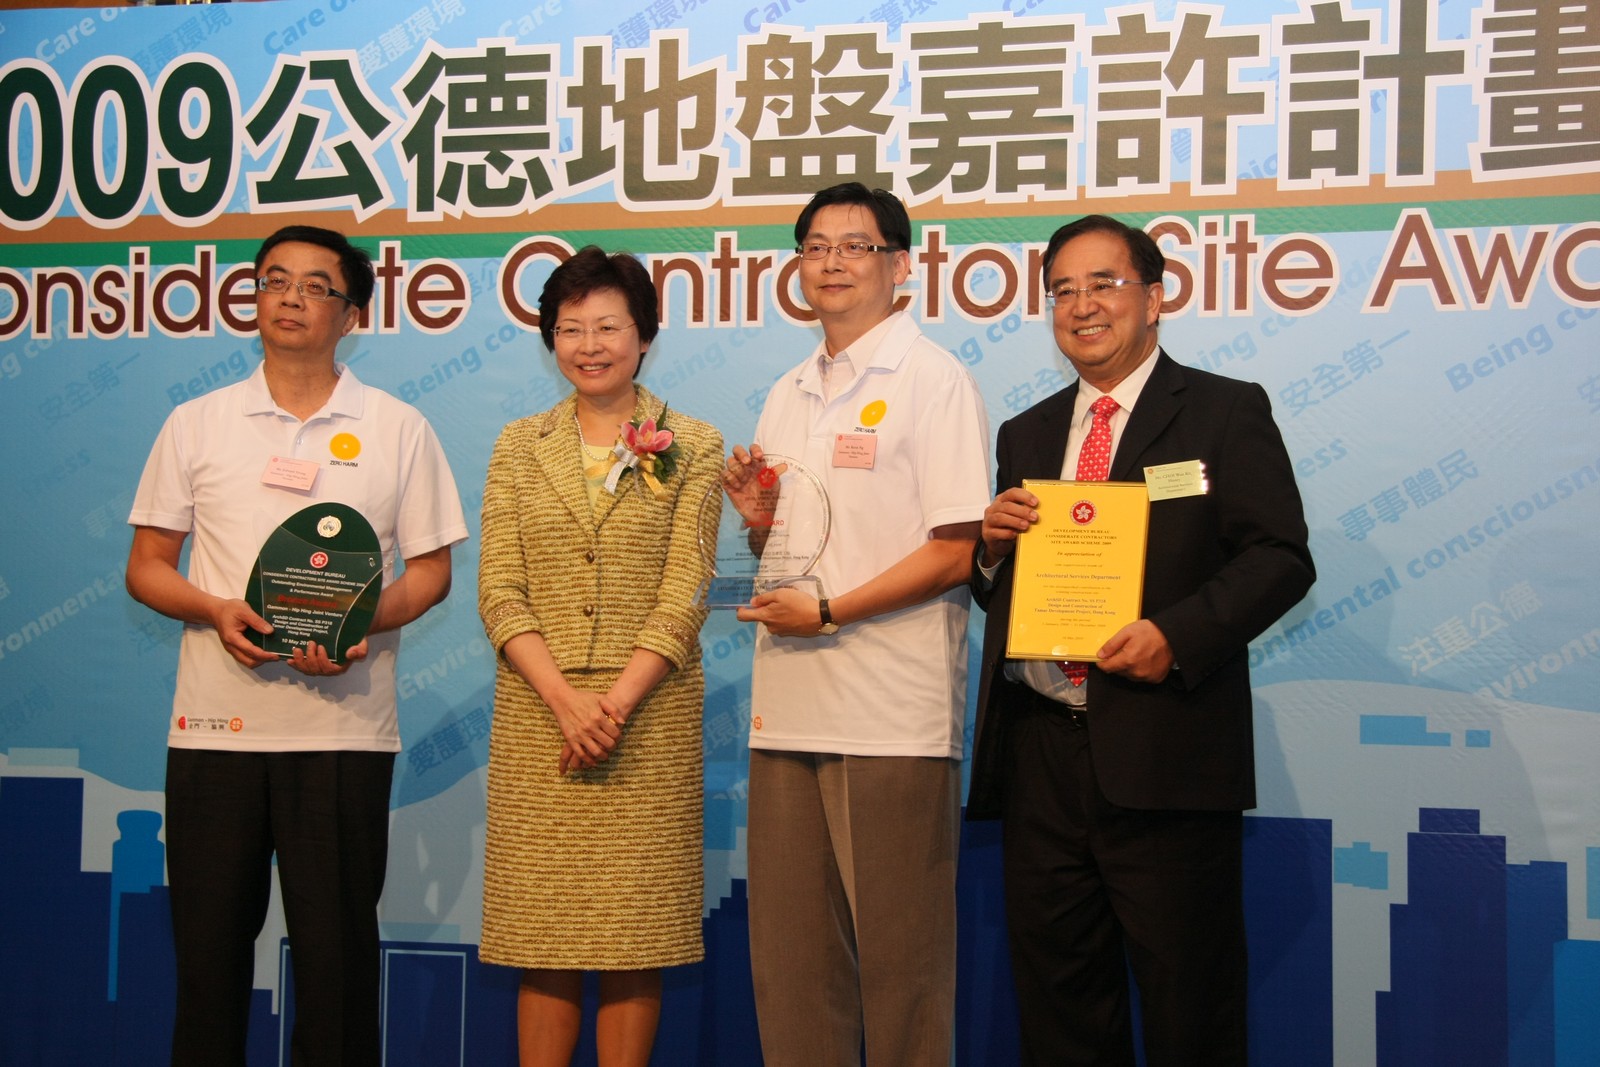 Mrs. Lam Cheng Yuet-ngor, Secretary for Development presents two grand awards for the Tamar Development Project to Associate Project Director Mr. Ng Man Lee (2nd right)